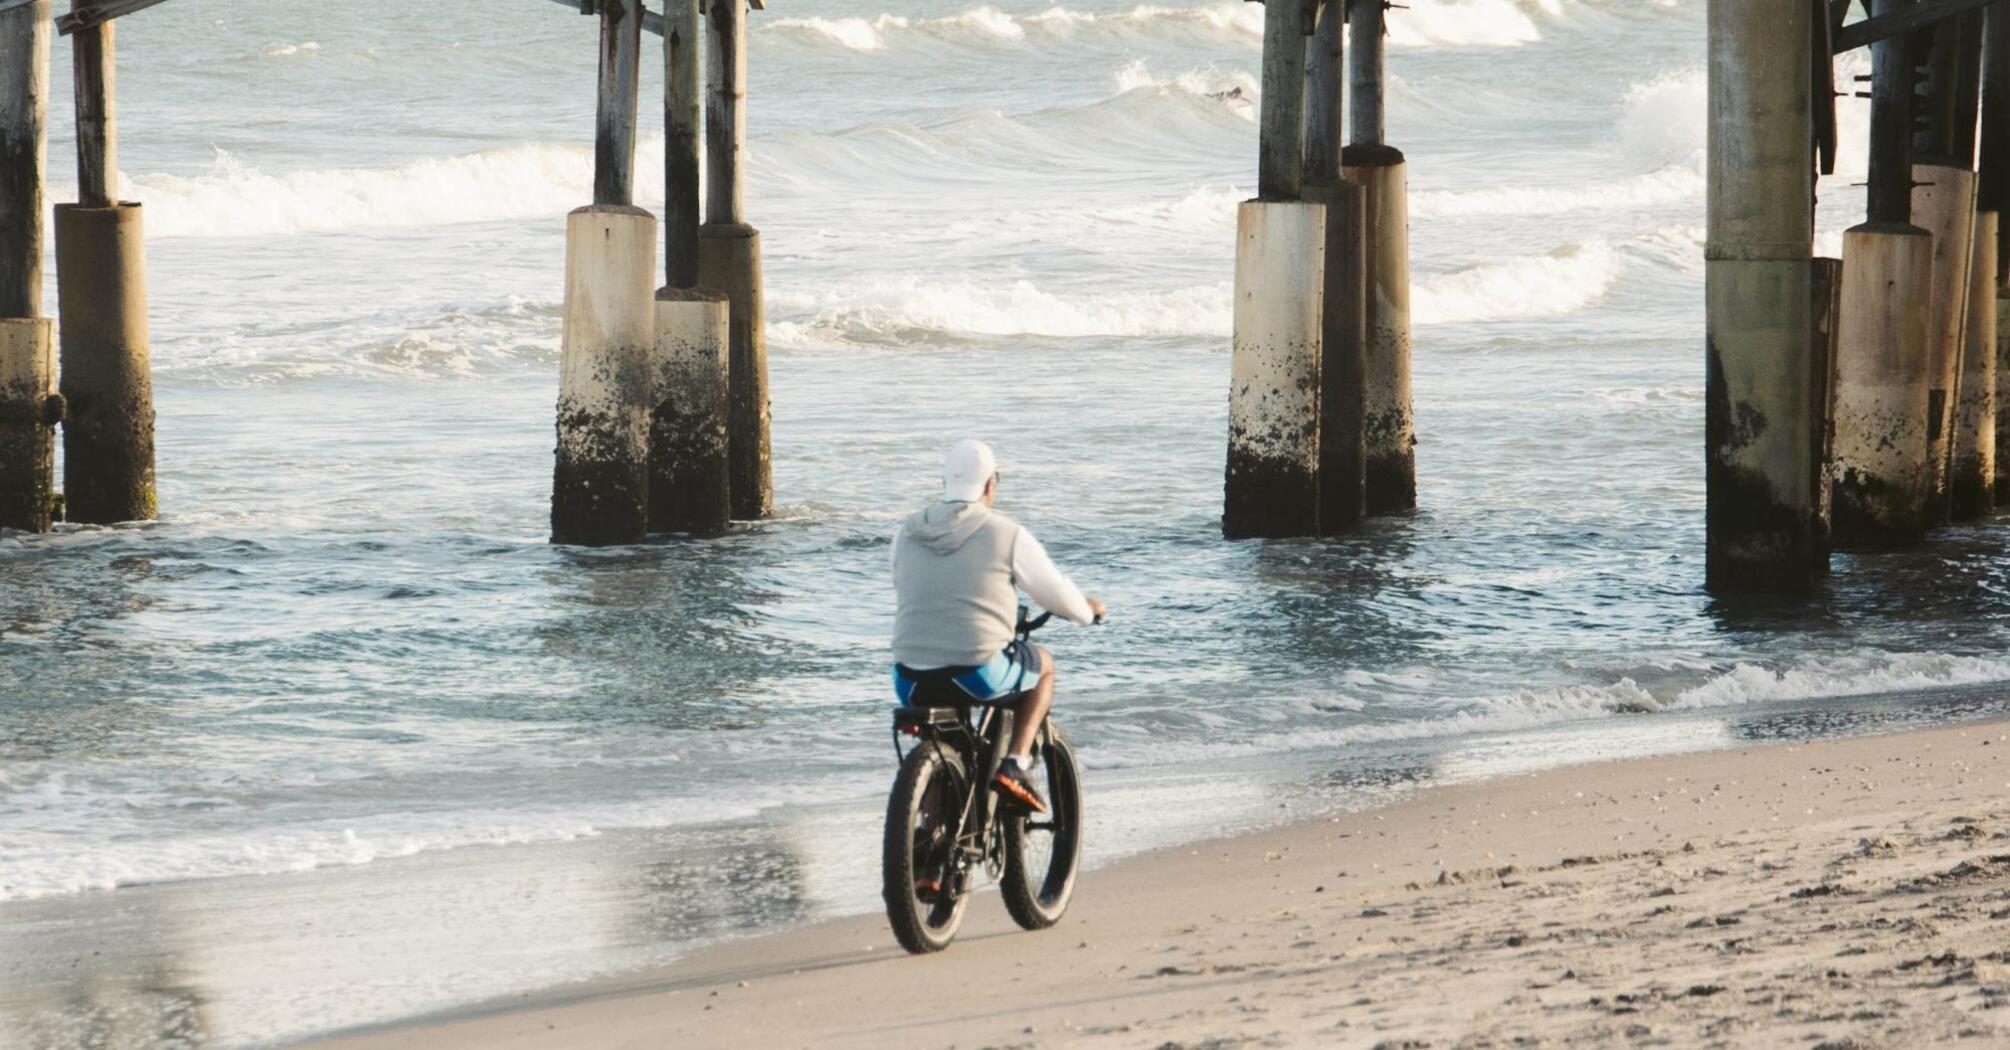 A person on a bicycle rides along the beach under a wooden pier